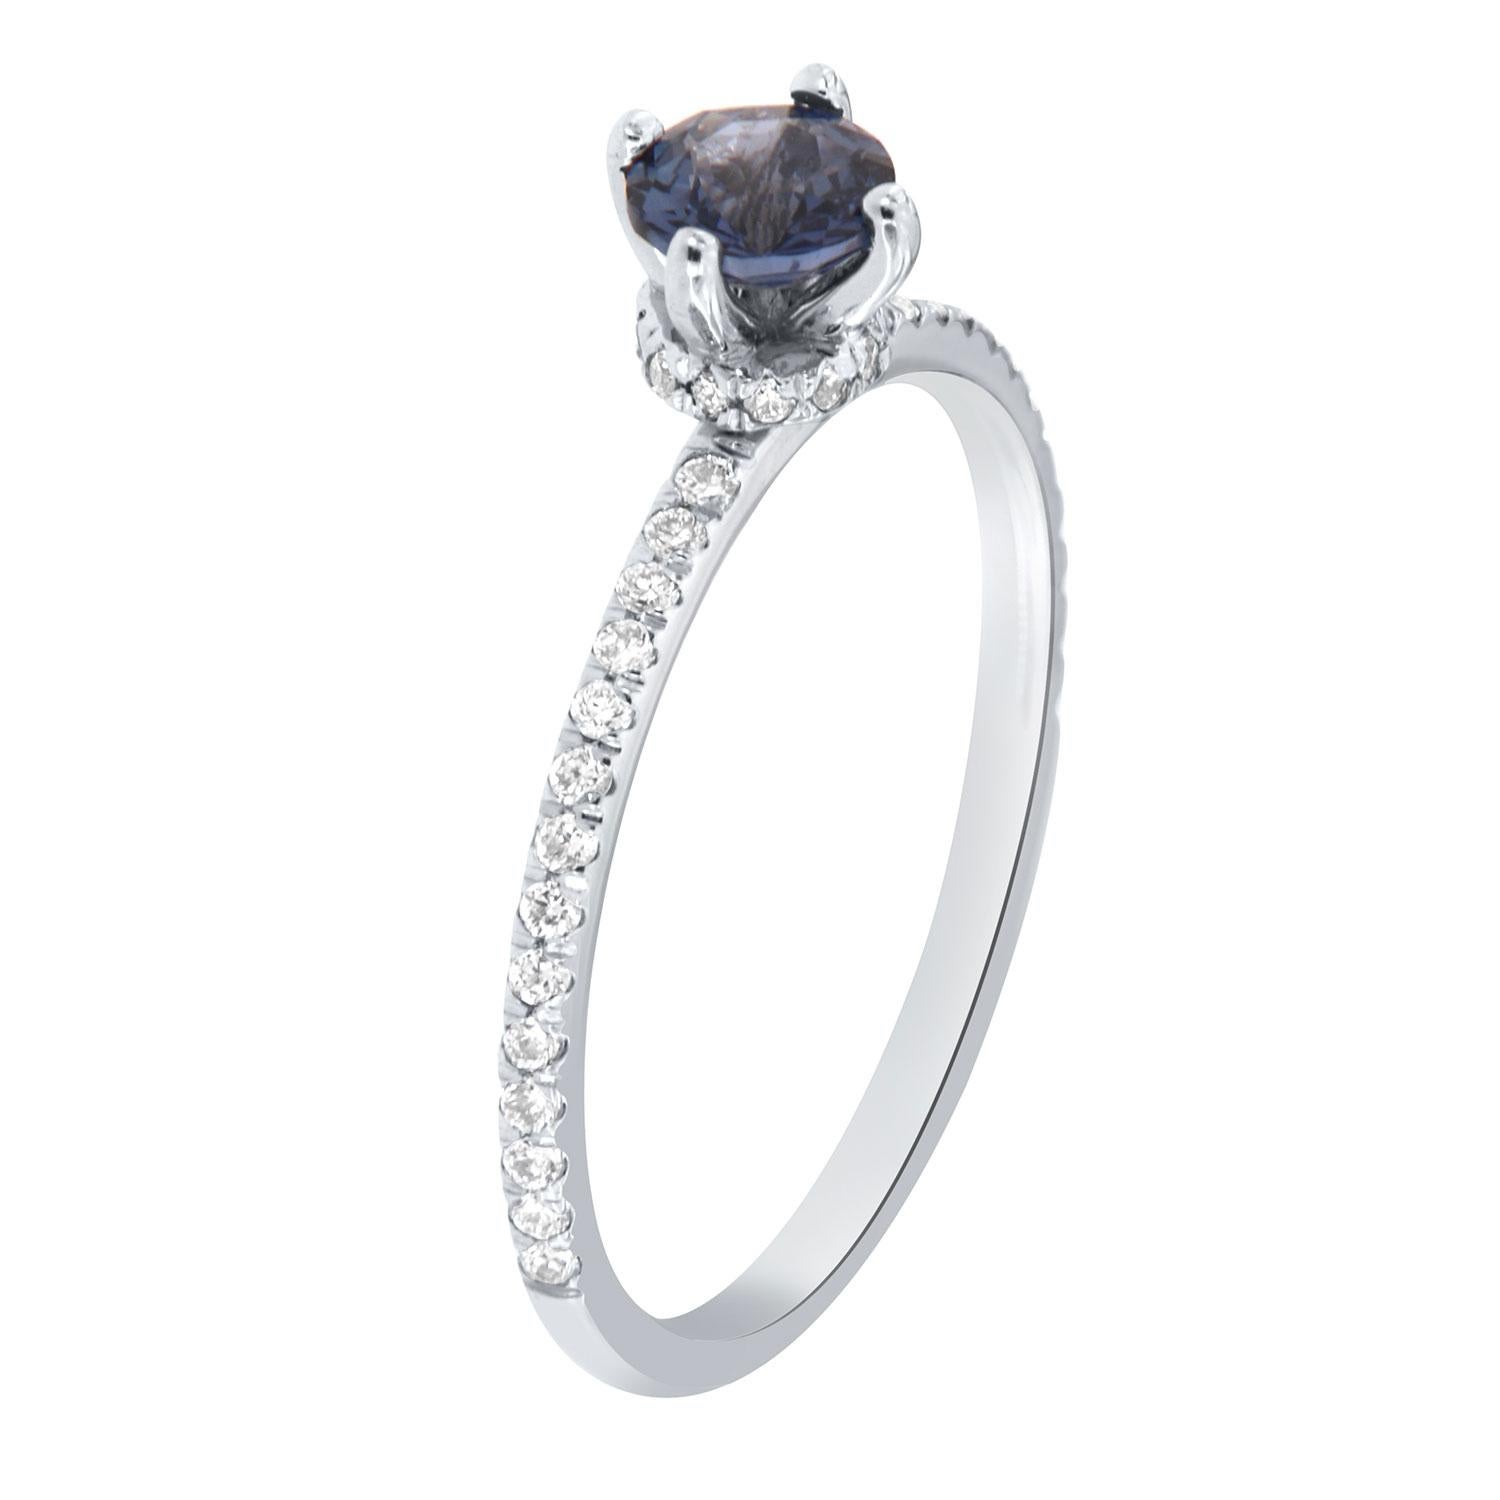 This delicate 18k white gold ring features a 0.51-Carat natural Diamond-cut Round shape  Sri-Lankan Sapphire encircled by a hidden halo of brilliant round diamonds on top of a 1.4 MM wide diamond band.
This beautiful Sapphire exhibits a vibrant blue